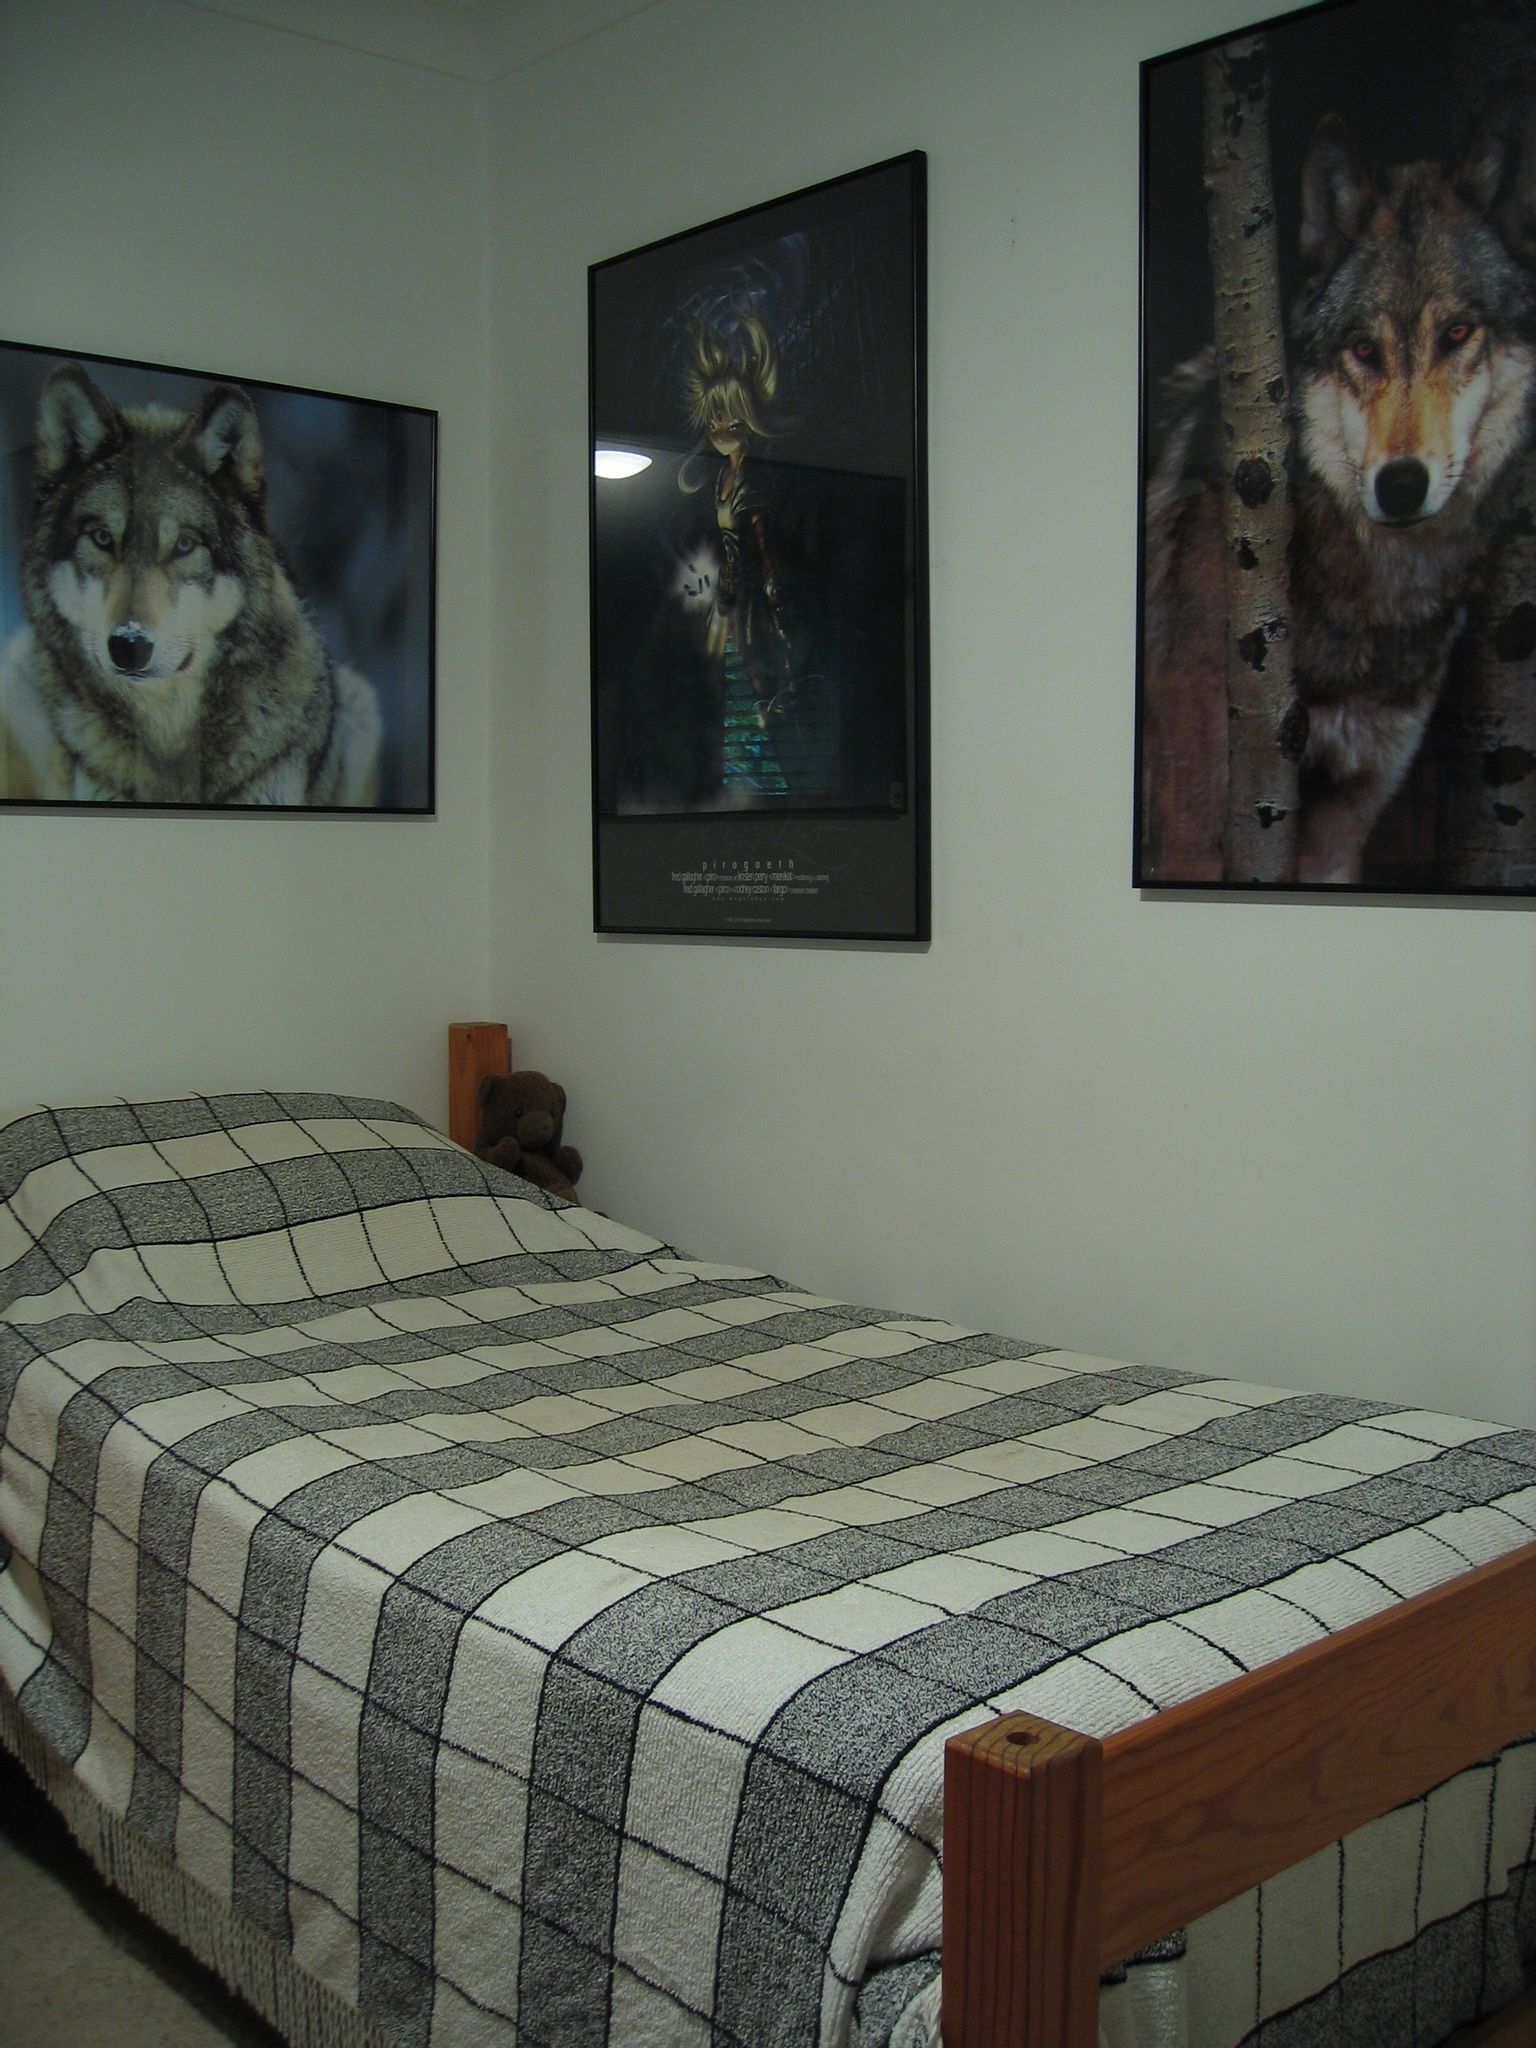 A photo of a single bed with a black and white square-pattern blanket on it, with three posters on the wall next to it. One is the aforementioned wolf poster, another is an ominous anime-style girl with blonde hair hovering just above the ground with a ball of light glowing in one hand, and the third is another wolf poster, this one a grey wolf standing next to a birch tree trunk.